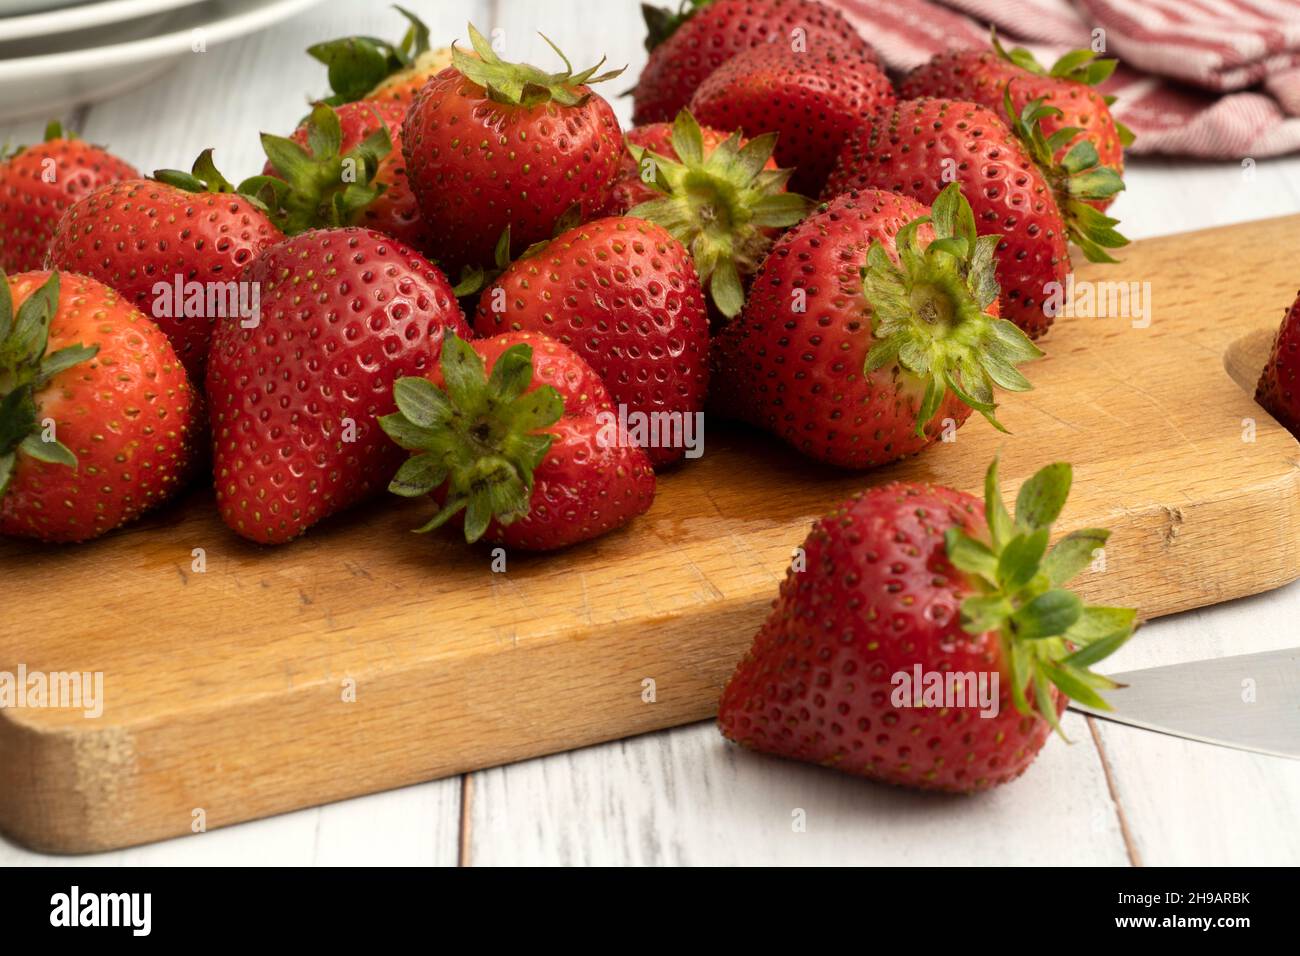 Fresh juicy ripe organic strawberries on a wooden cutting board close up Stock Photo